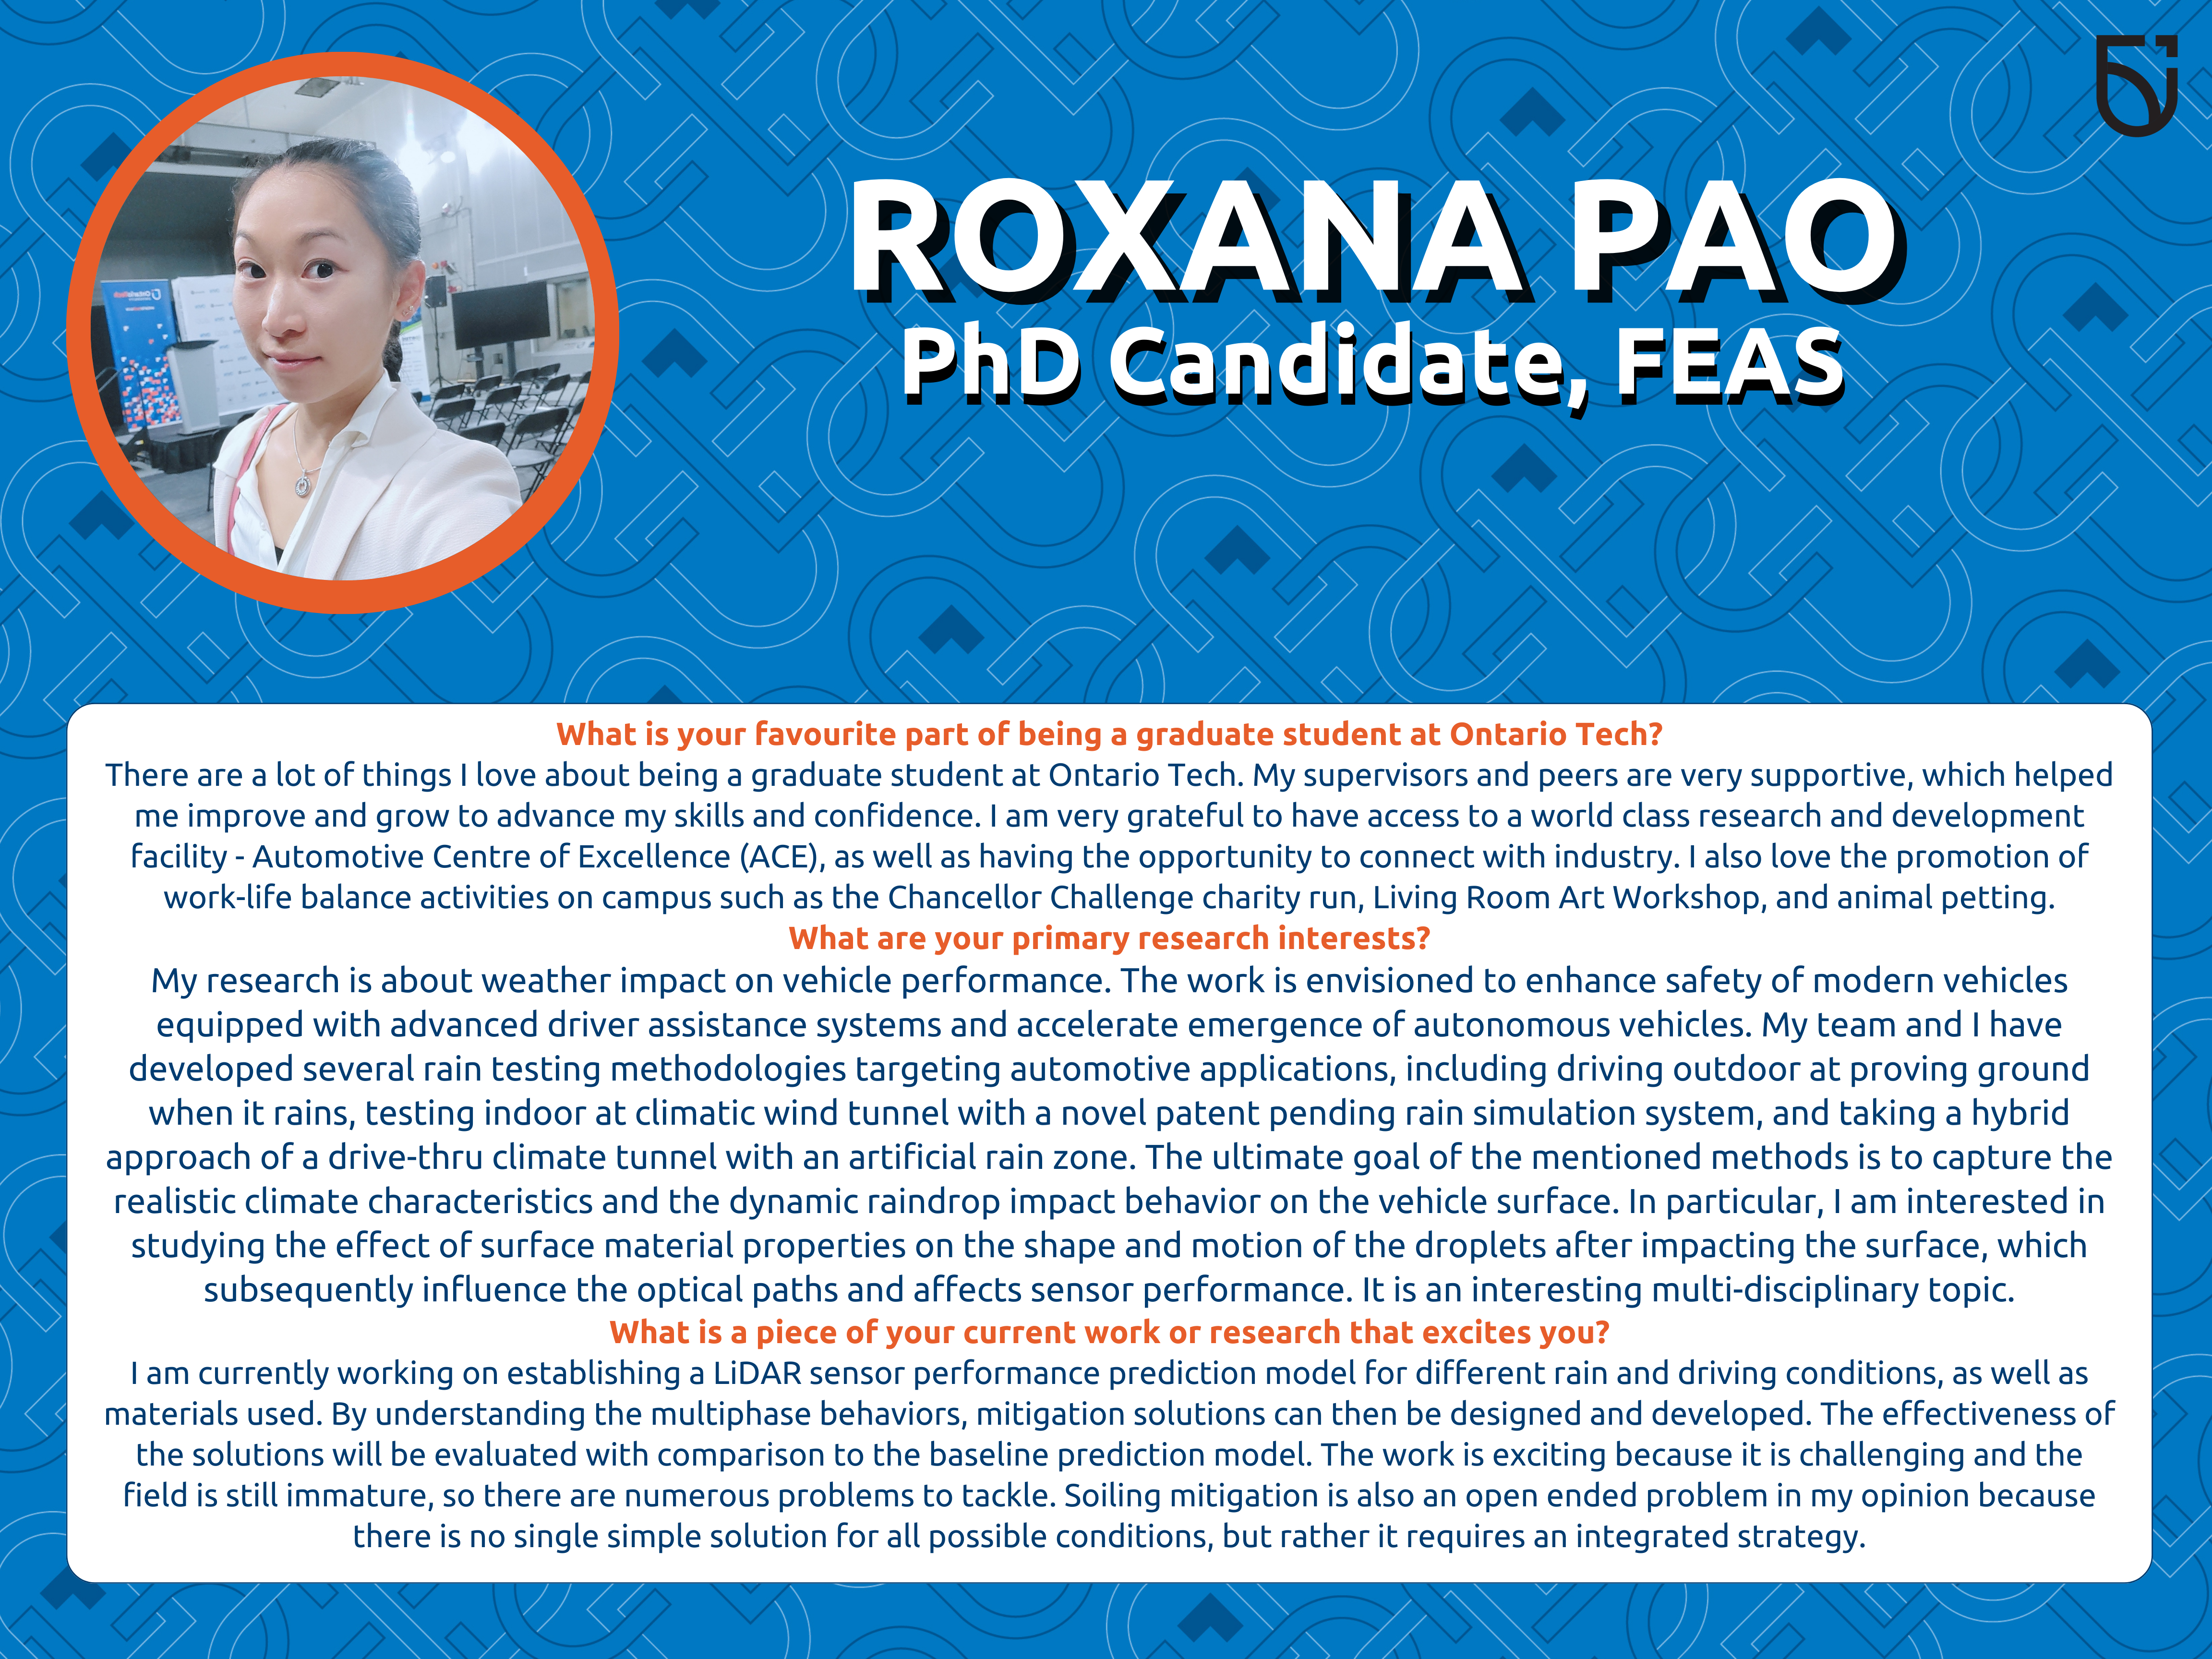 This photo is a Women’s Wednesday feature of Roxana Pao, a PhD Candidate in the Faculty of Engineering and Applied Science